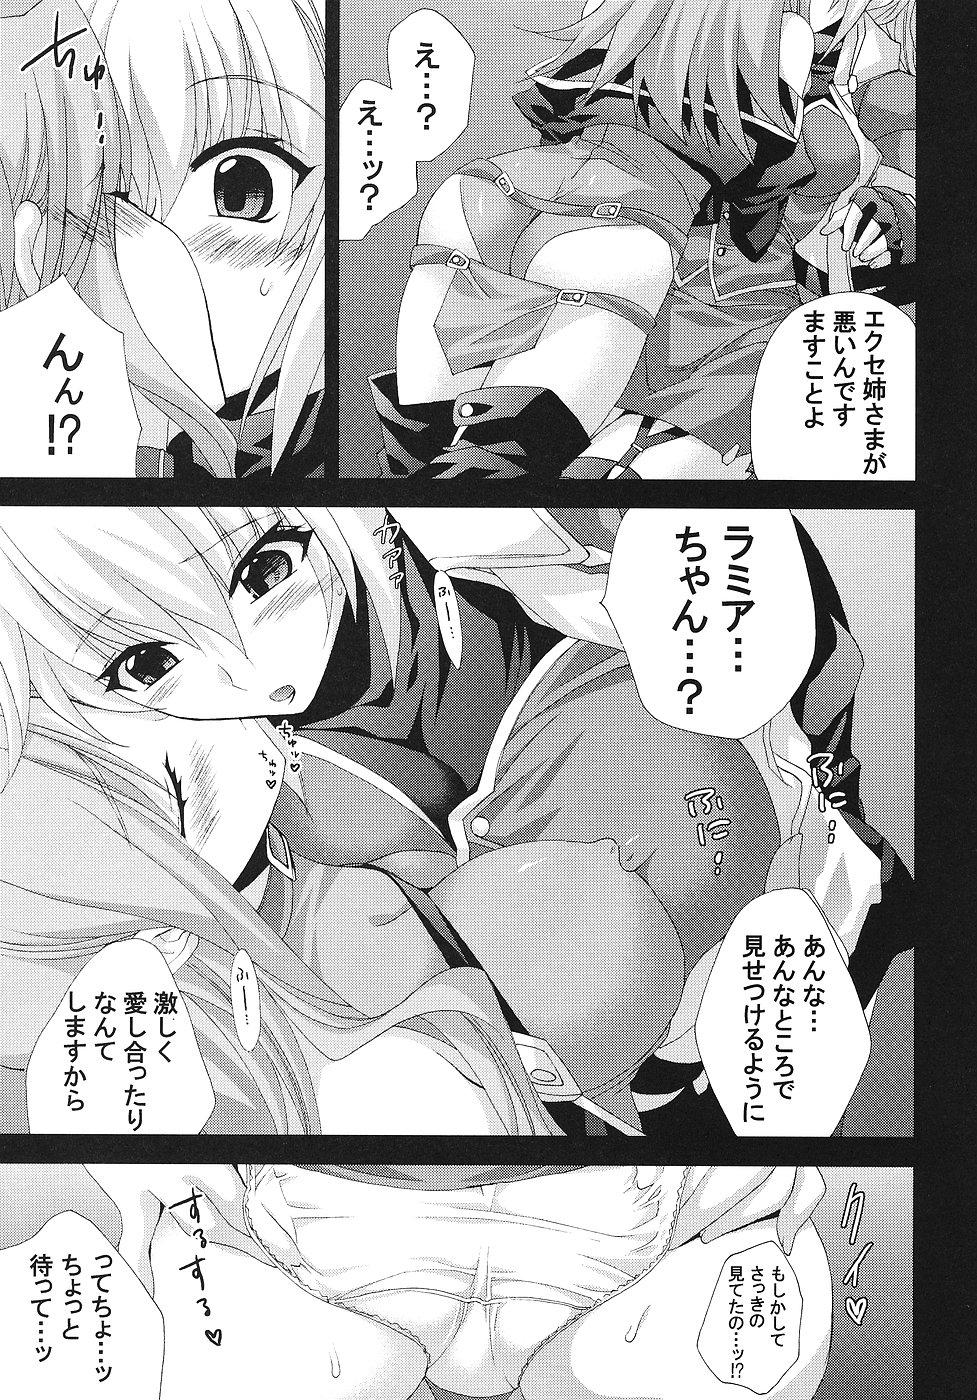 Young Night and day - Super robot wars Seduction Porn - Page 6